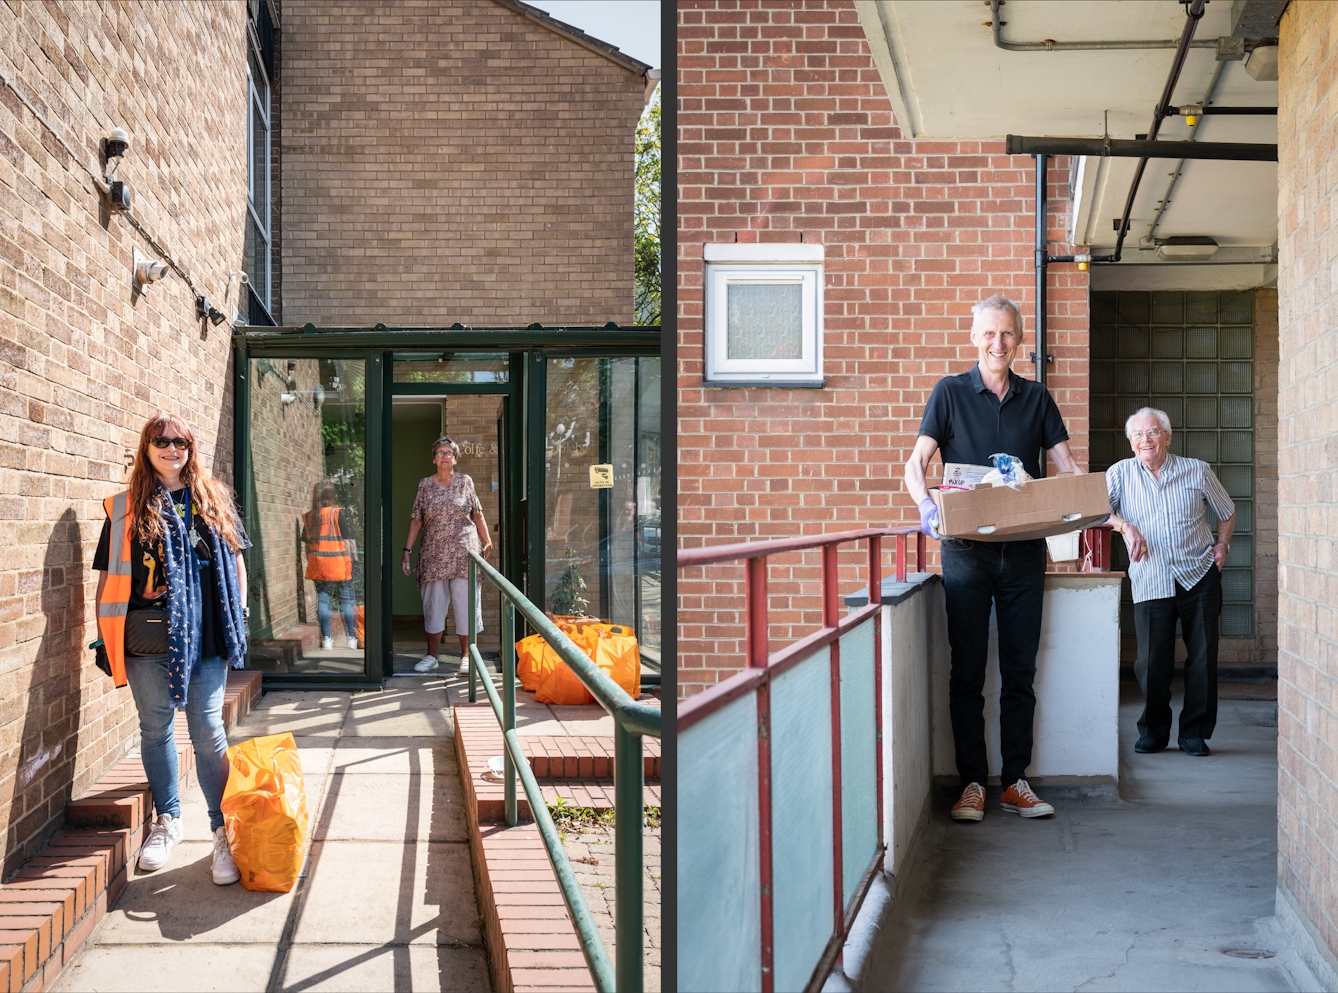 Photographic diptych. The image on the right shows a woman in a high-vis vest standing on the entrance path to sheltered accommodation building. At her feet is a bag of food shopping. In the background by the entrance door is a woman, stood by several bags of food shopping.  In the image on the right a man holding a cardboard box containing food stands on the walkway of a block of flats. In the background an older man leans against the handrail, smiling to camera.